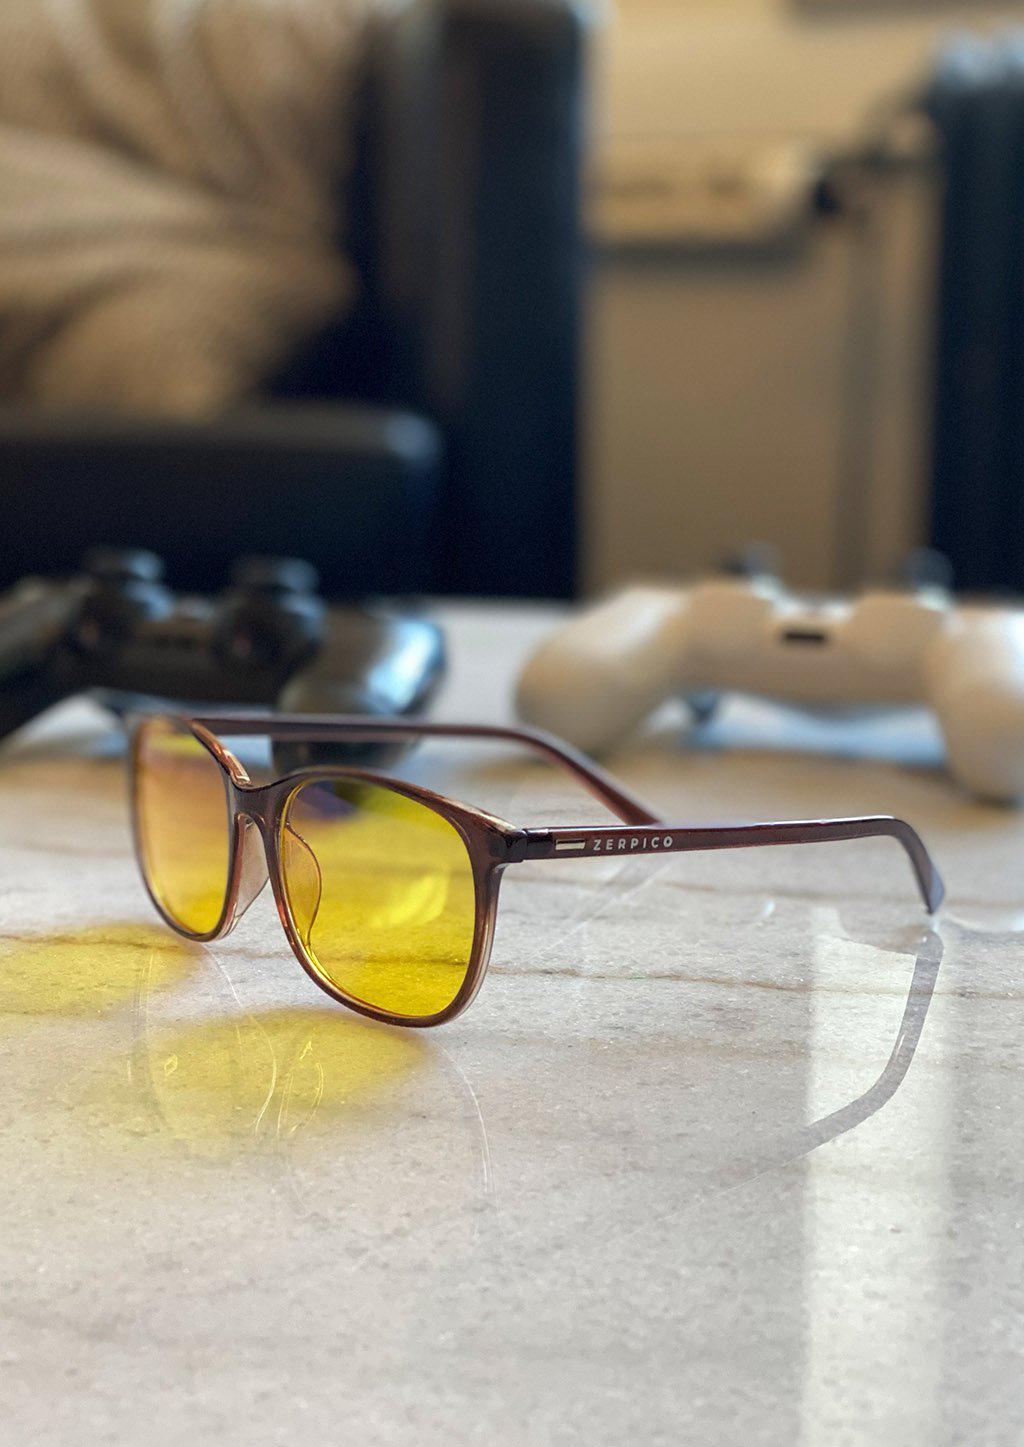 Neo gaming and anti bluelight wayfarer glasses with yellow lenses. The best choice for all gamers.